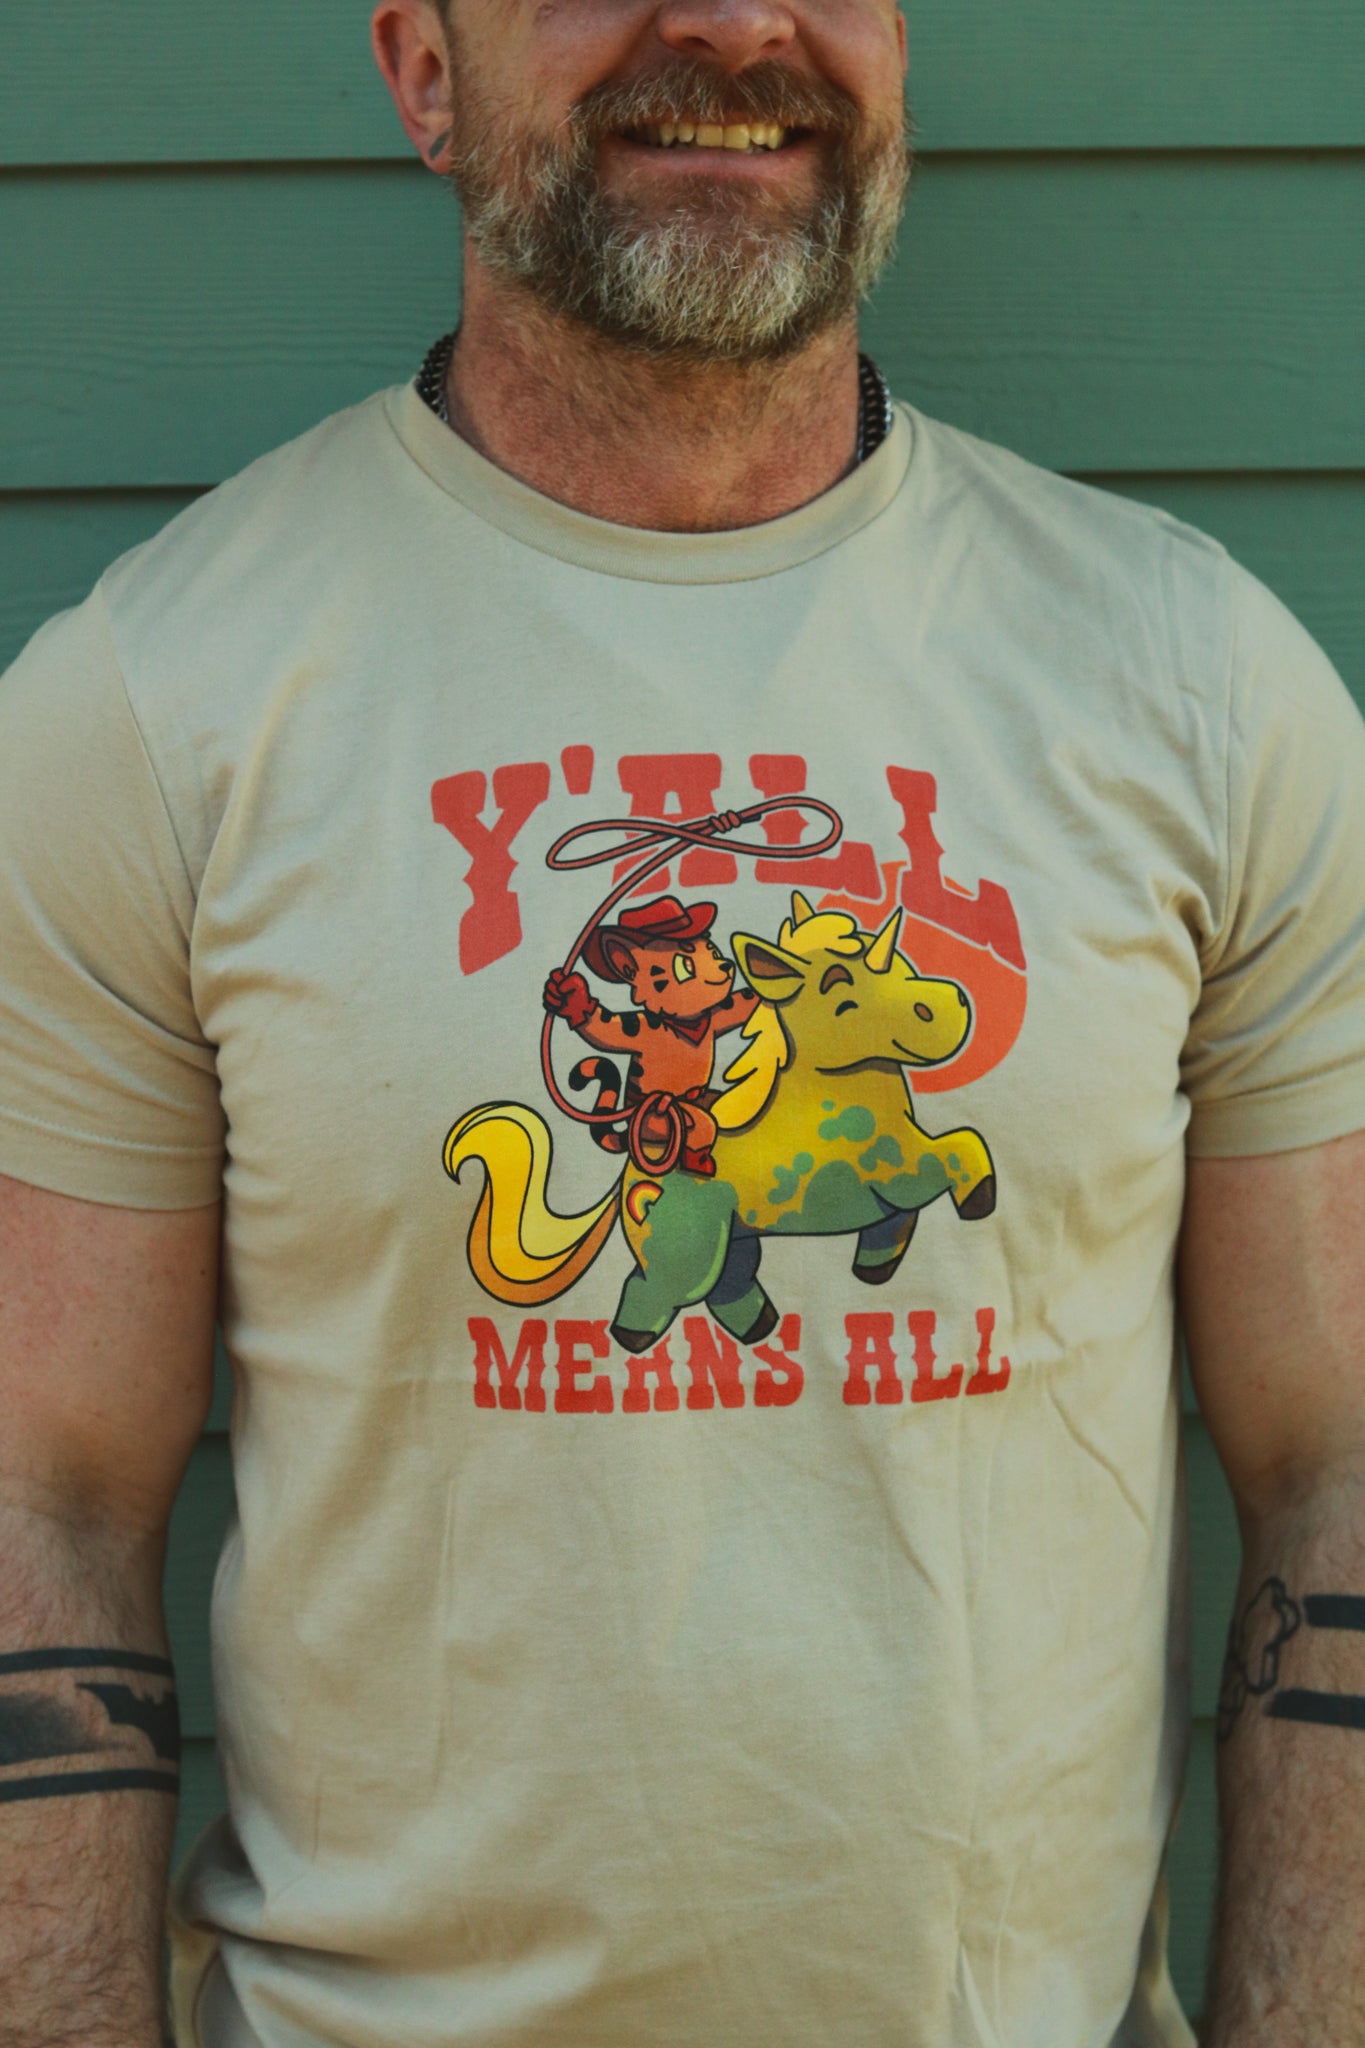 light tan tshirt top worn by bearded guy, displaying tiger riding unicorn in rainbow colors and the text "y'll means all"